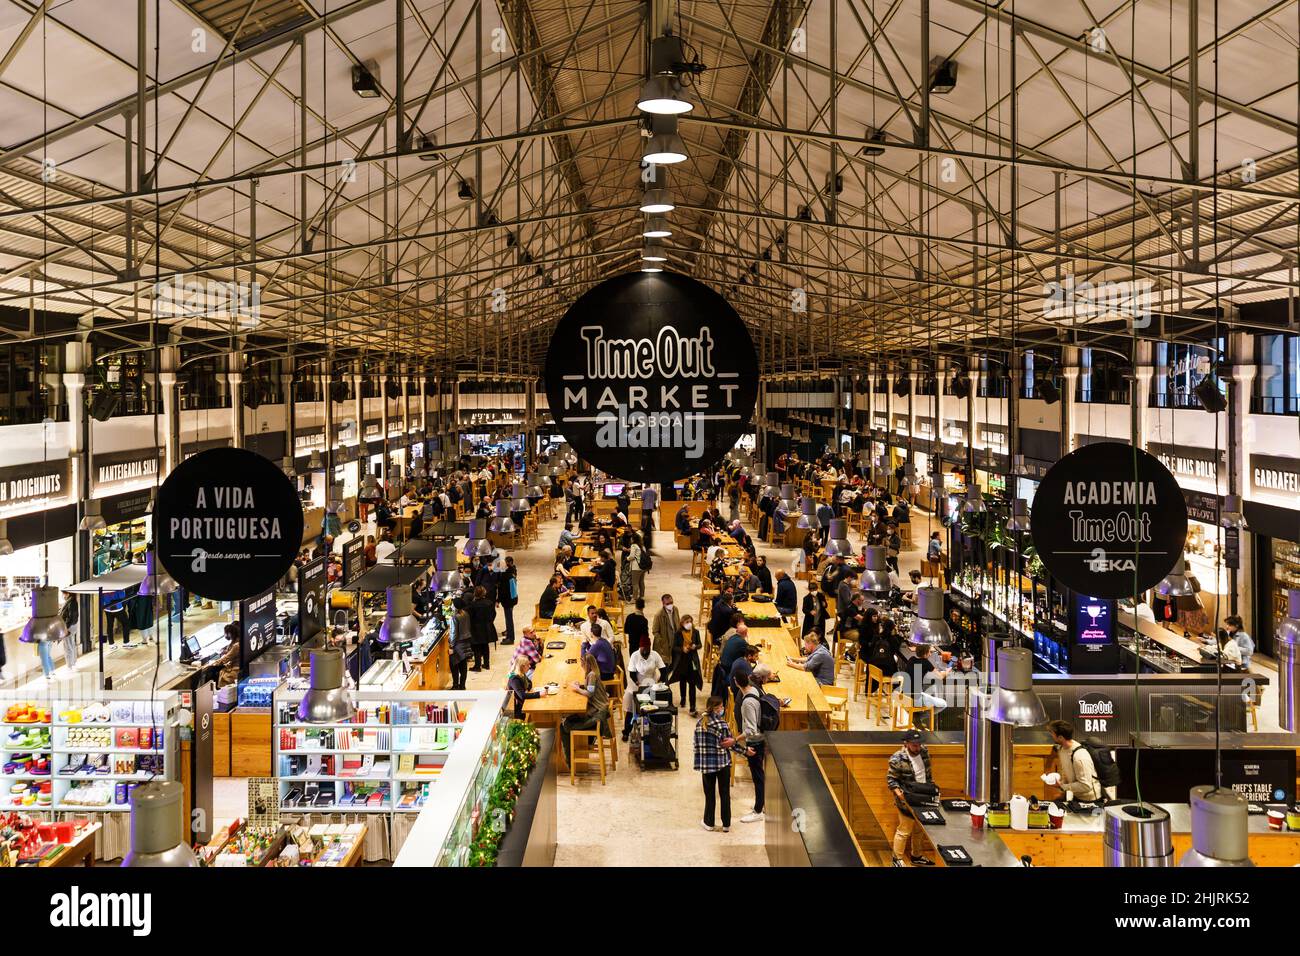 Lisbon, Portugal - November 20 2021: Interior view of the Time Out Market Lisboa, a trendy food hall located in the Mercado da Ribeira at Cais do Sodr Stock Photo